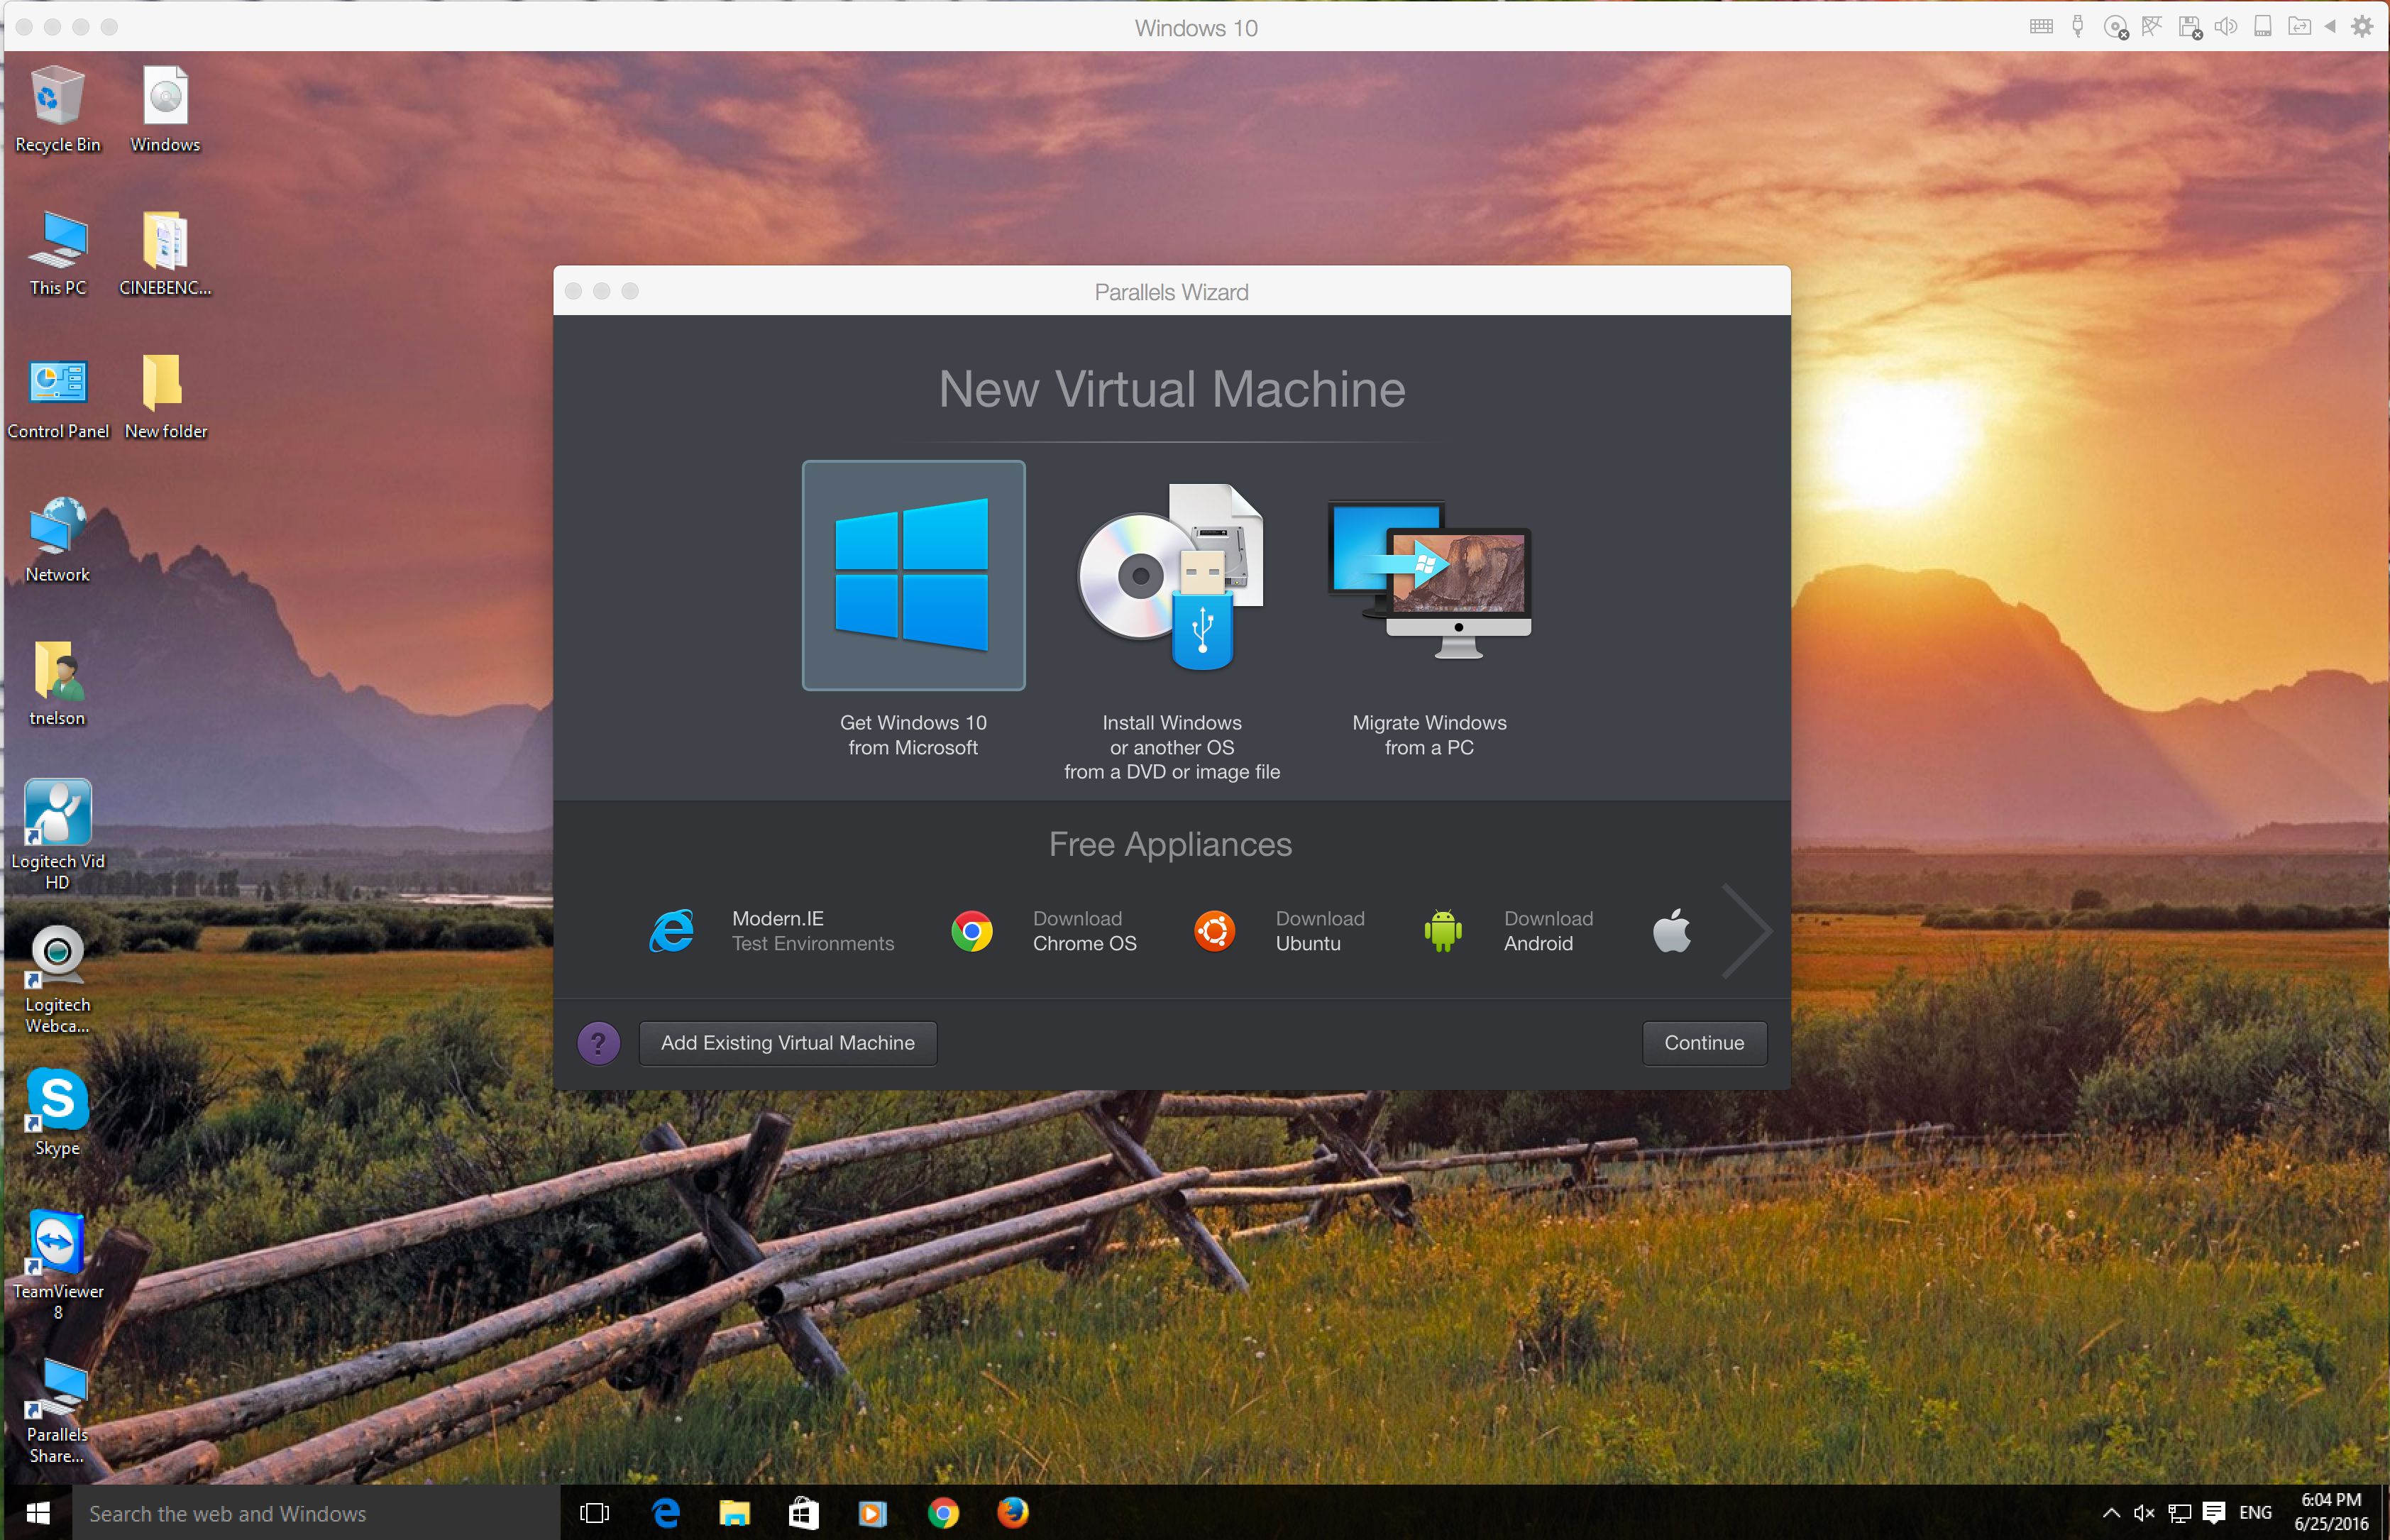 windows 7 for mac using parallels